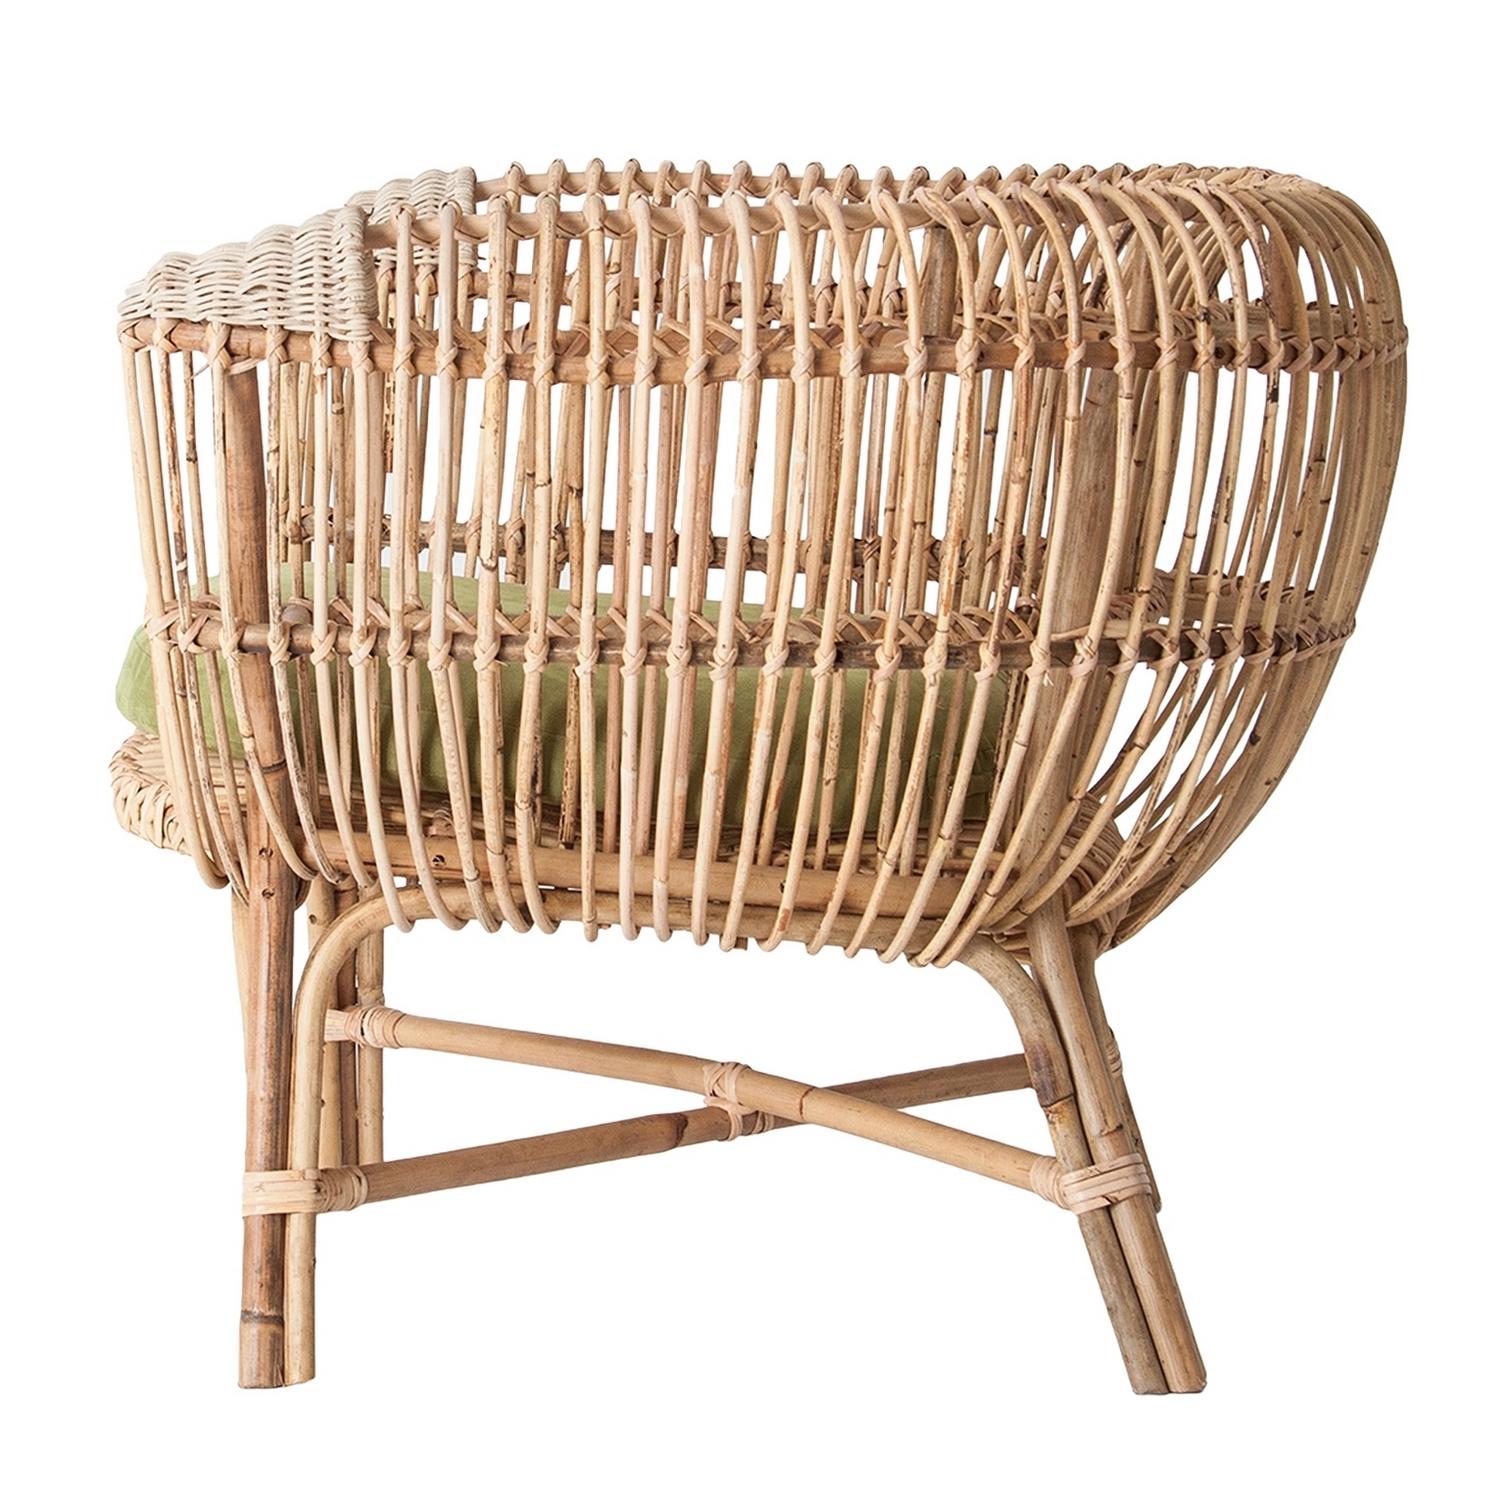 1950s Italian design style armchair with a natural rattan airy structure.